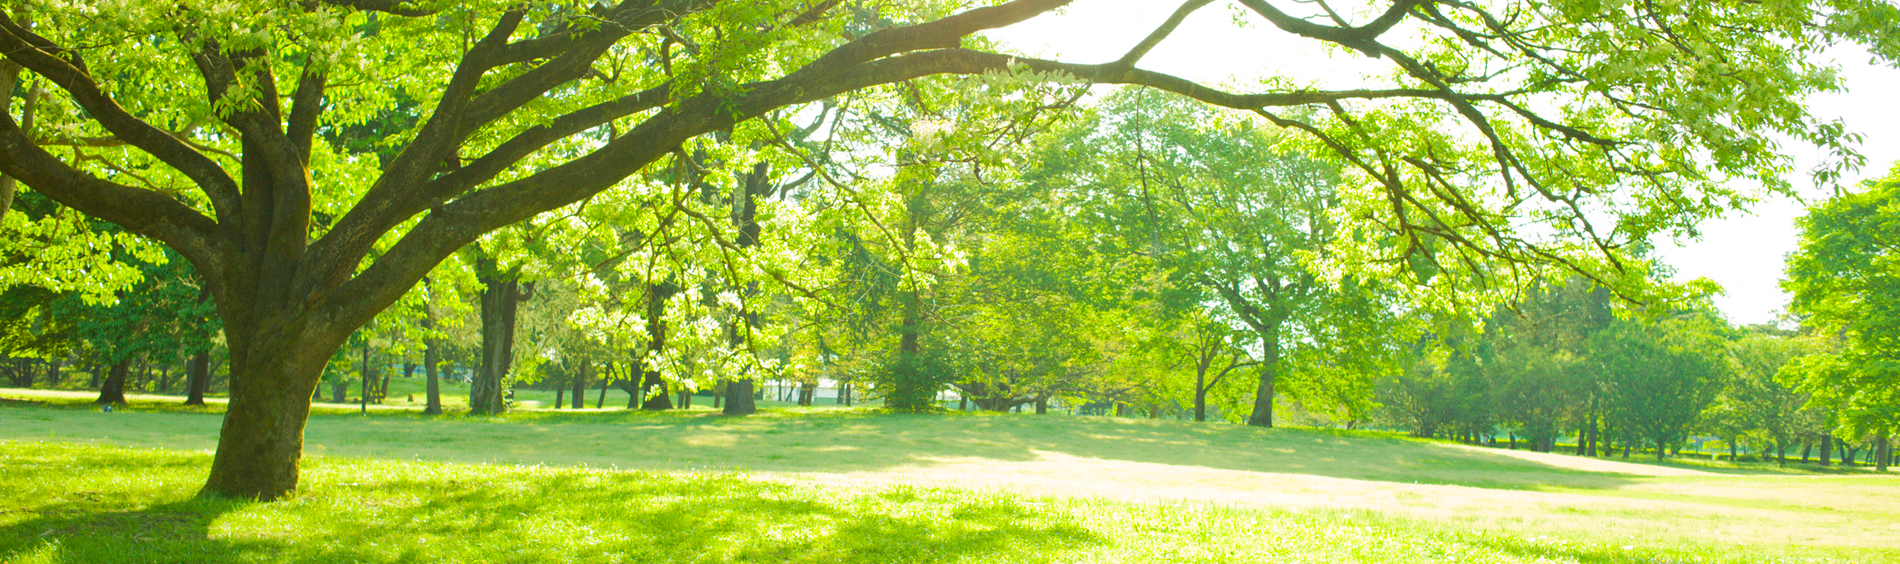 A park with large trees and green grass